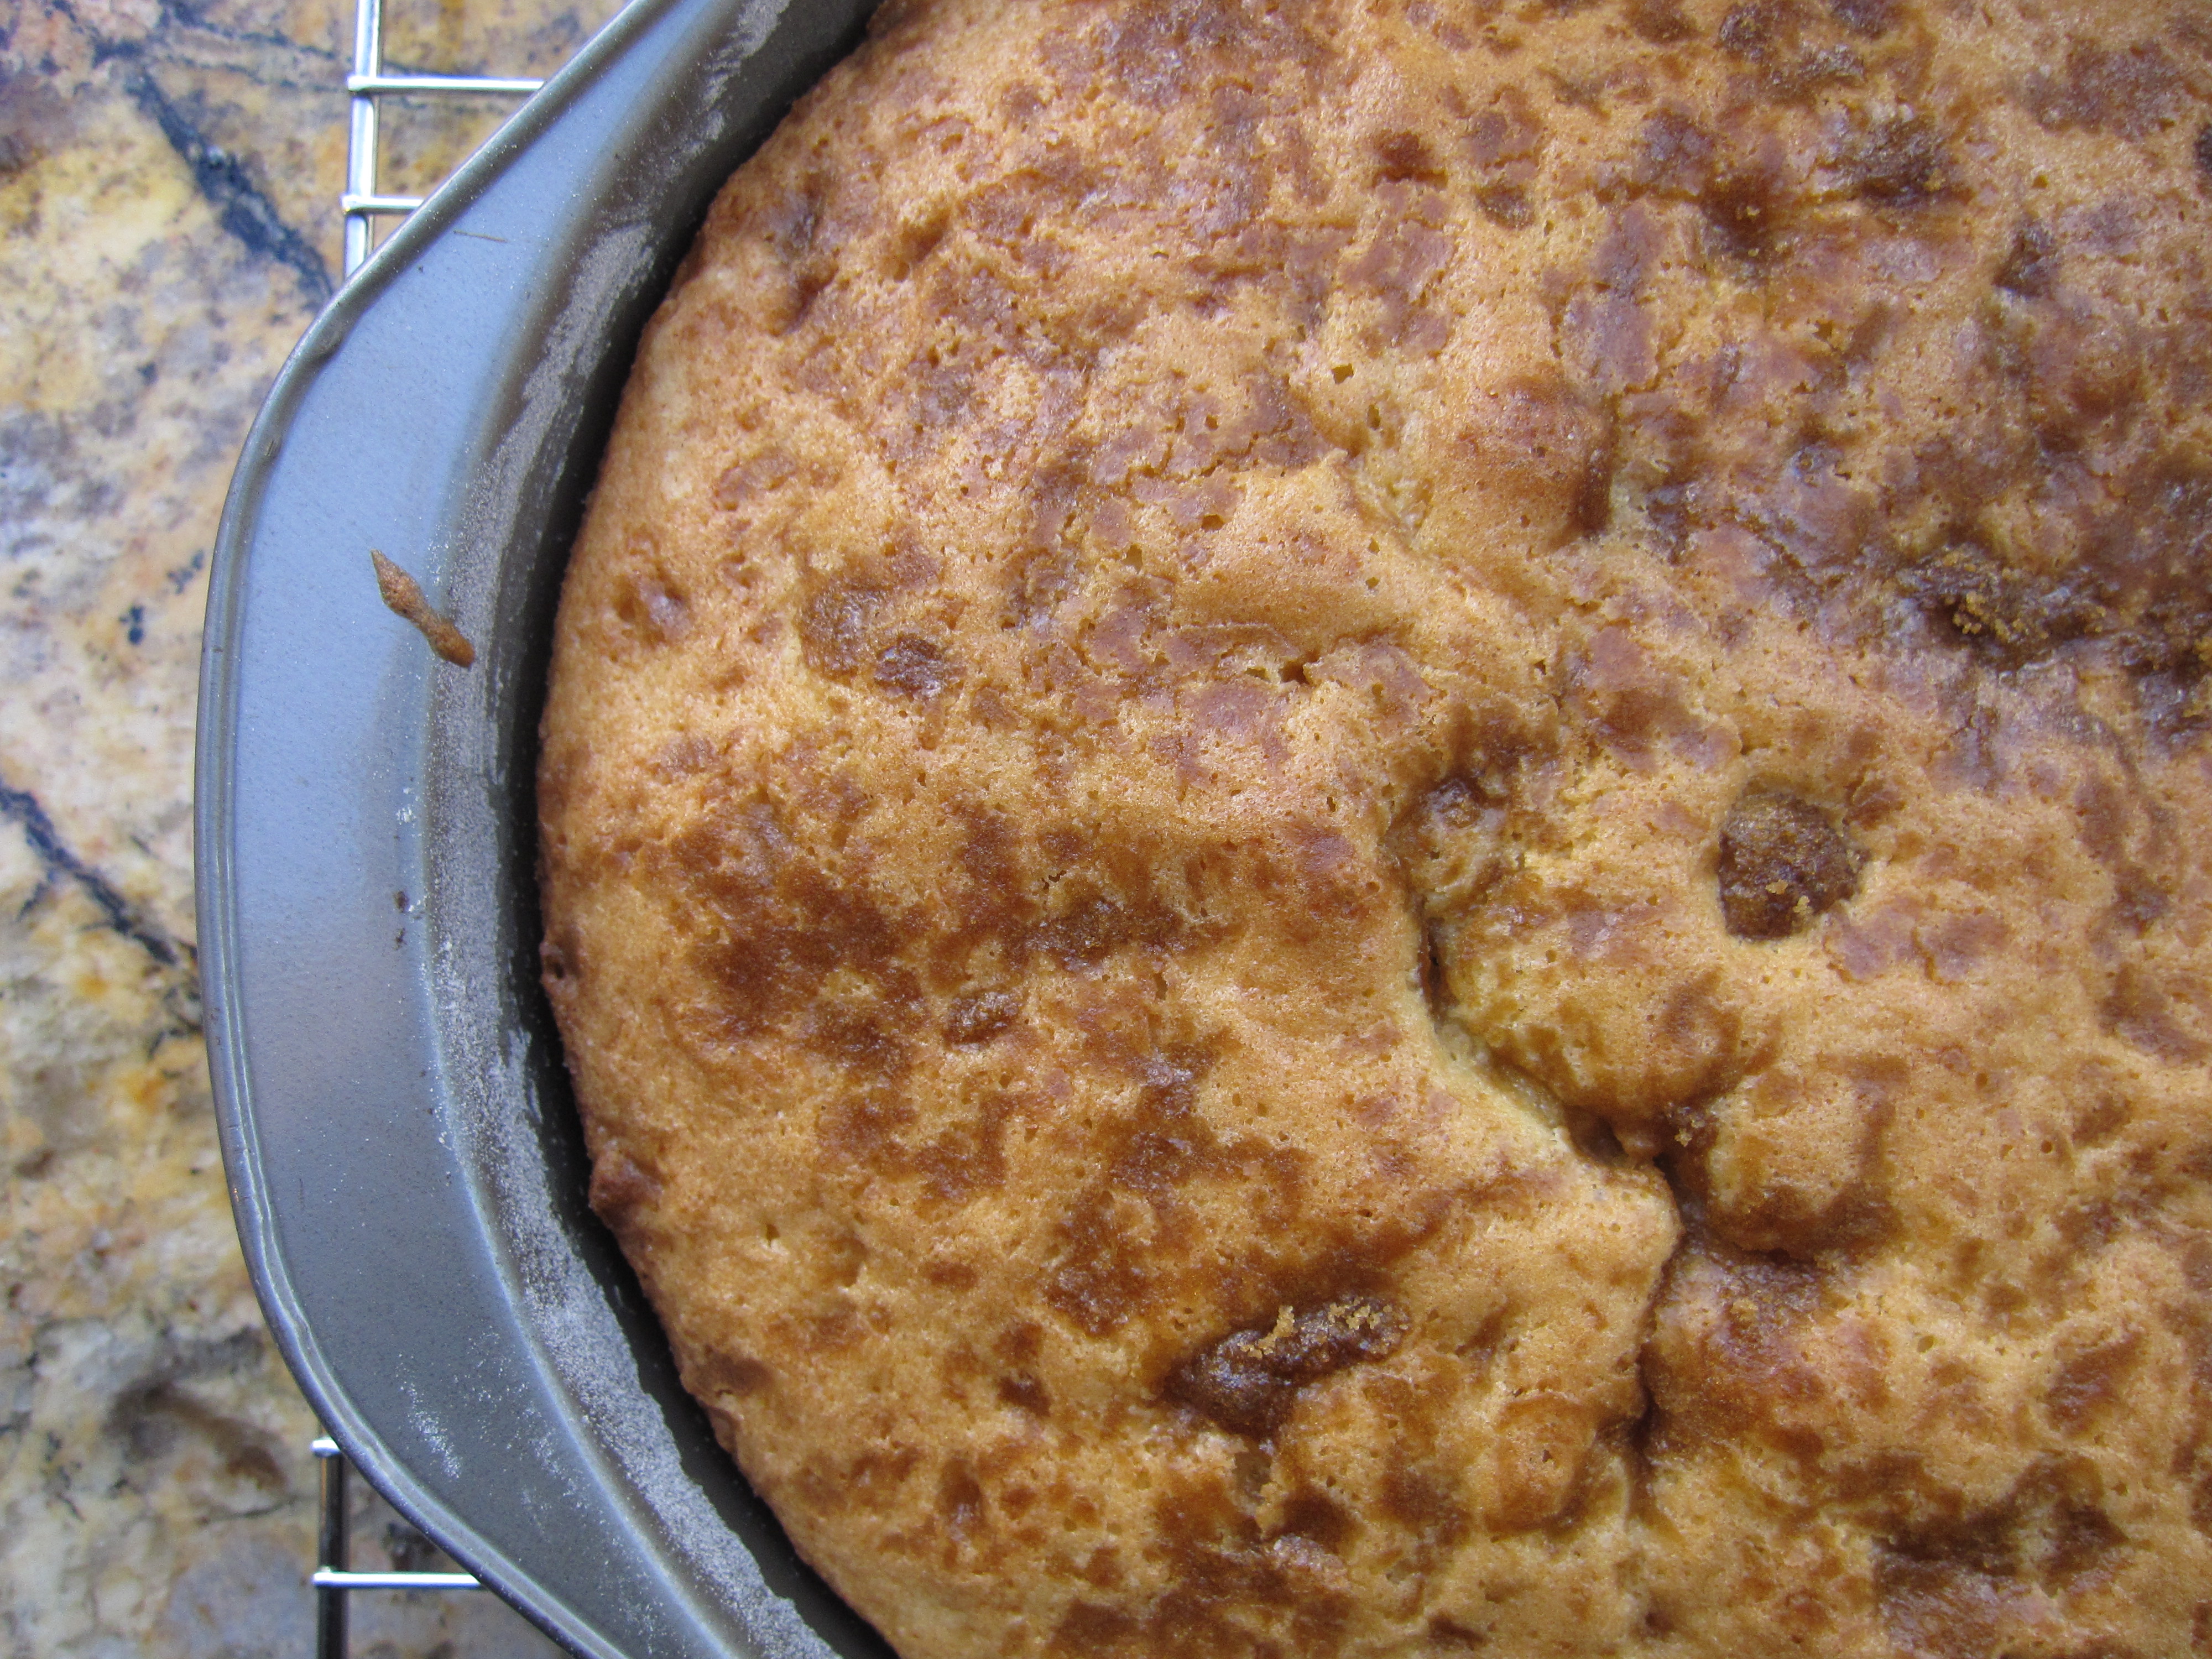 Baked cake on cooling rack.